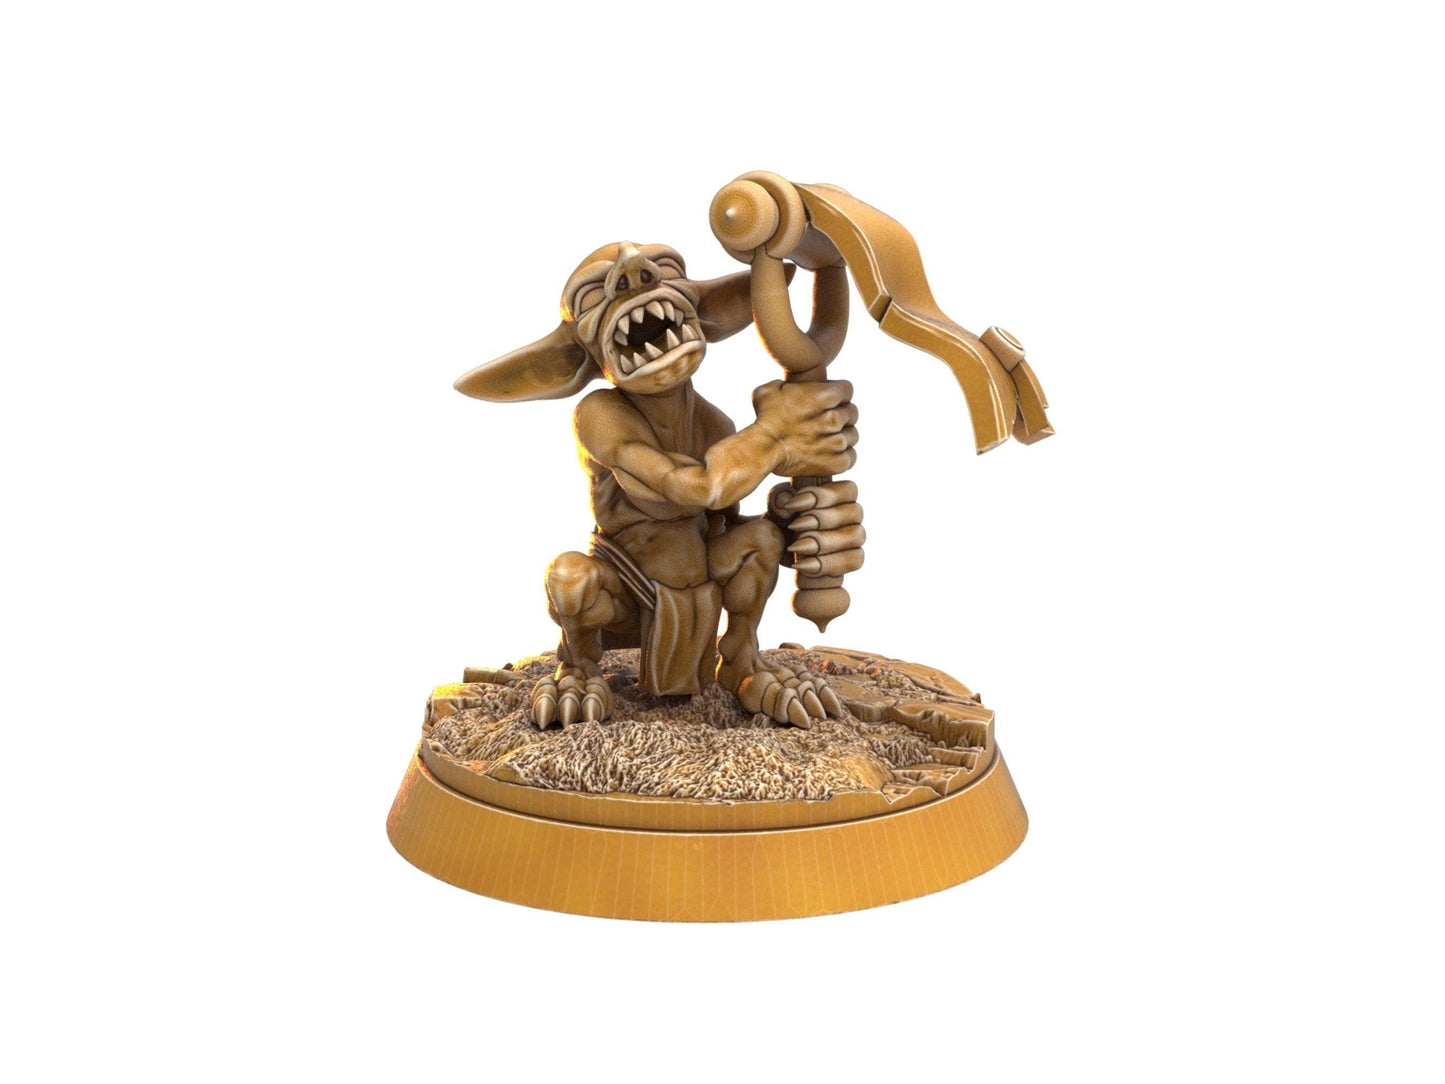 DnD Goblin Miniature Monster MIniature - 6 Poses - 32mm scale Tabletop gaming DnD Miniature Dungeons and Dragons dnd 5e book miniature small miniature - Plague Miniatures shop for DnD Miniatures